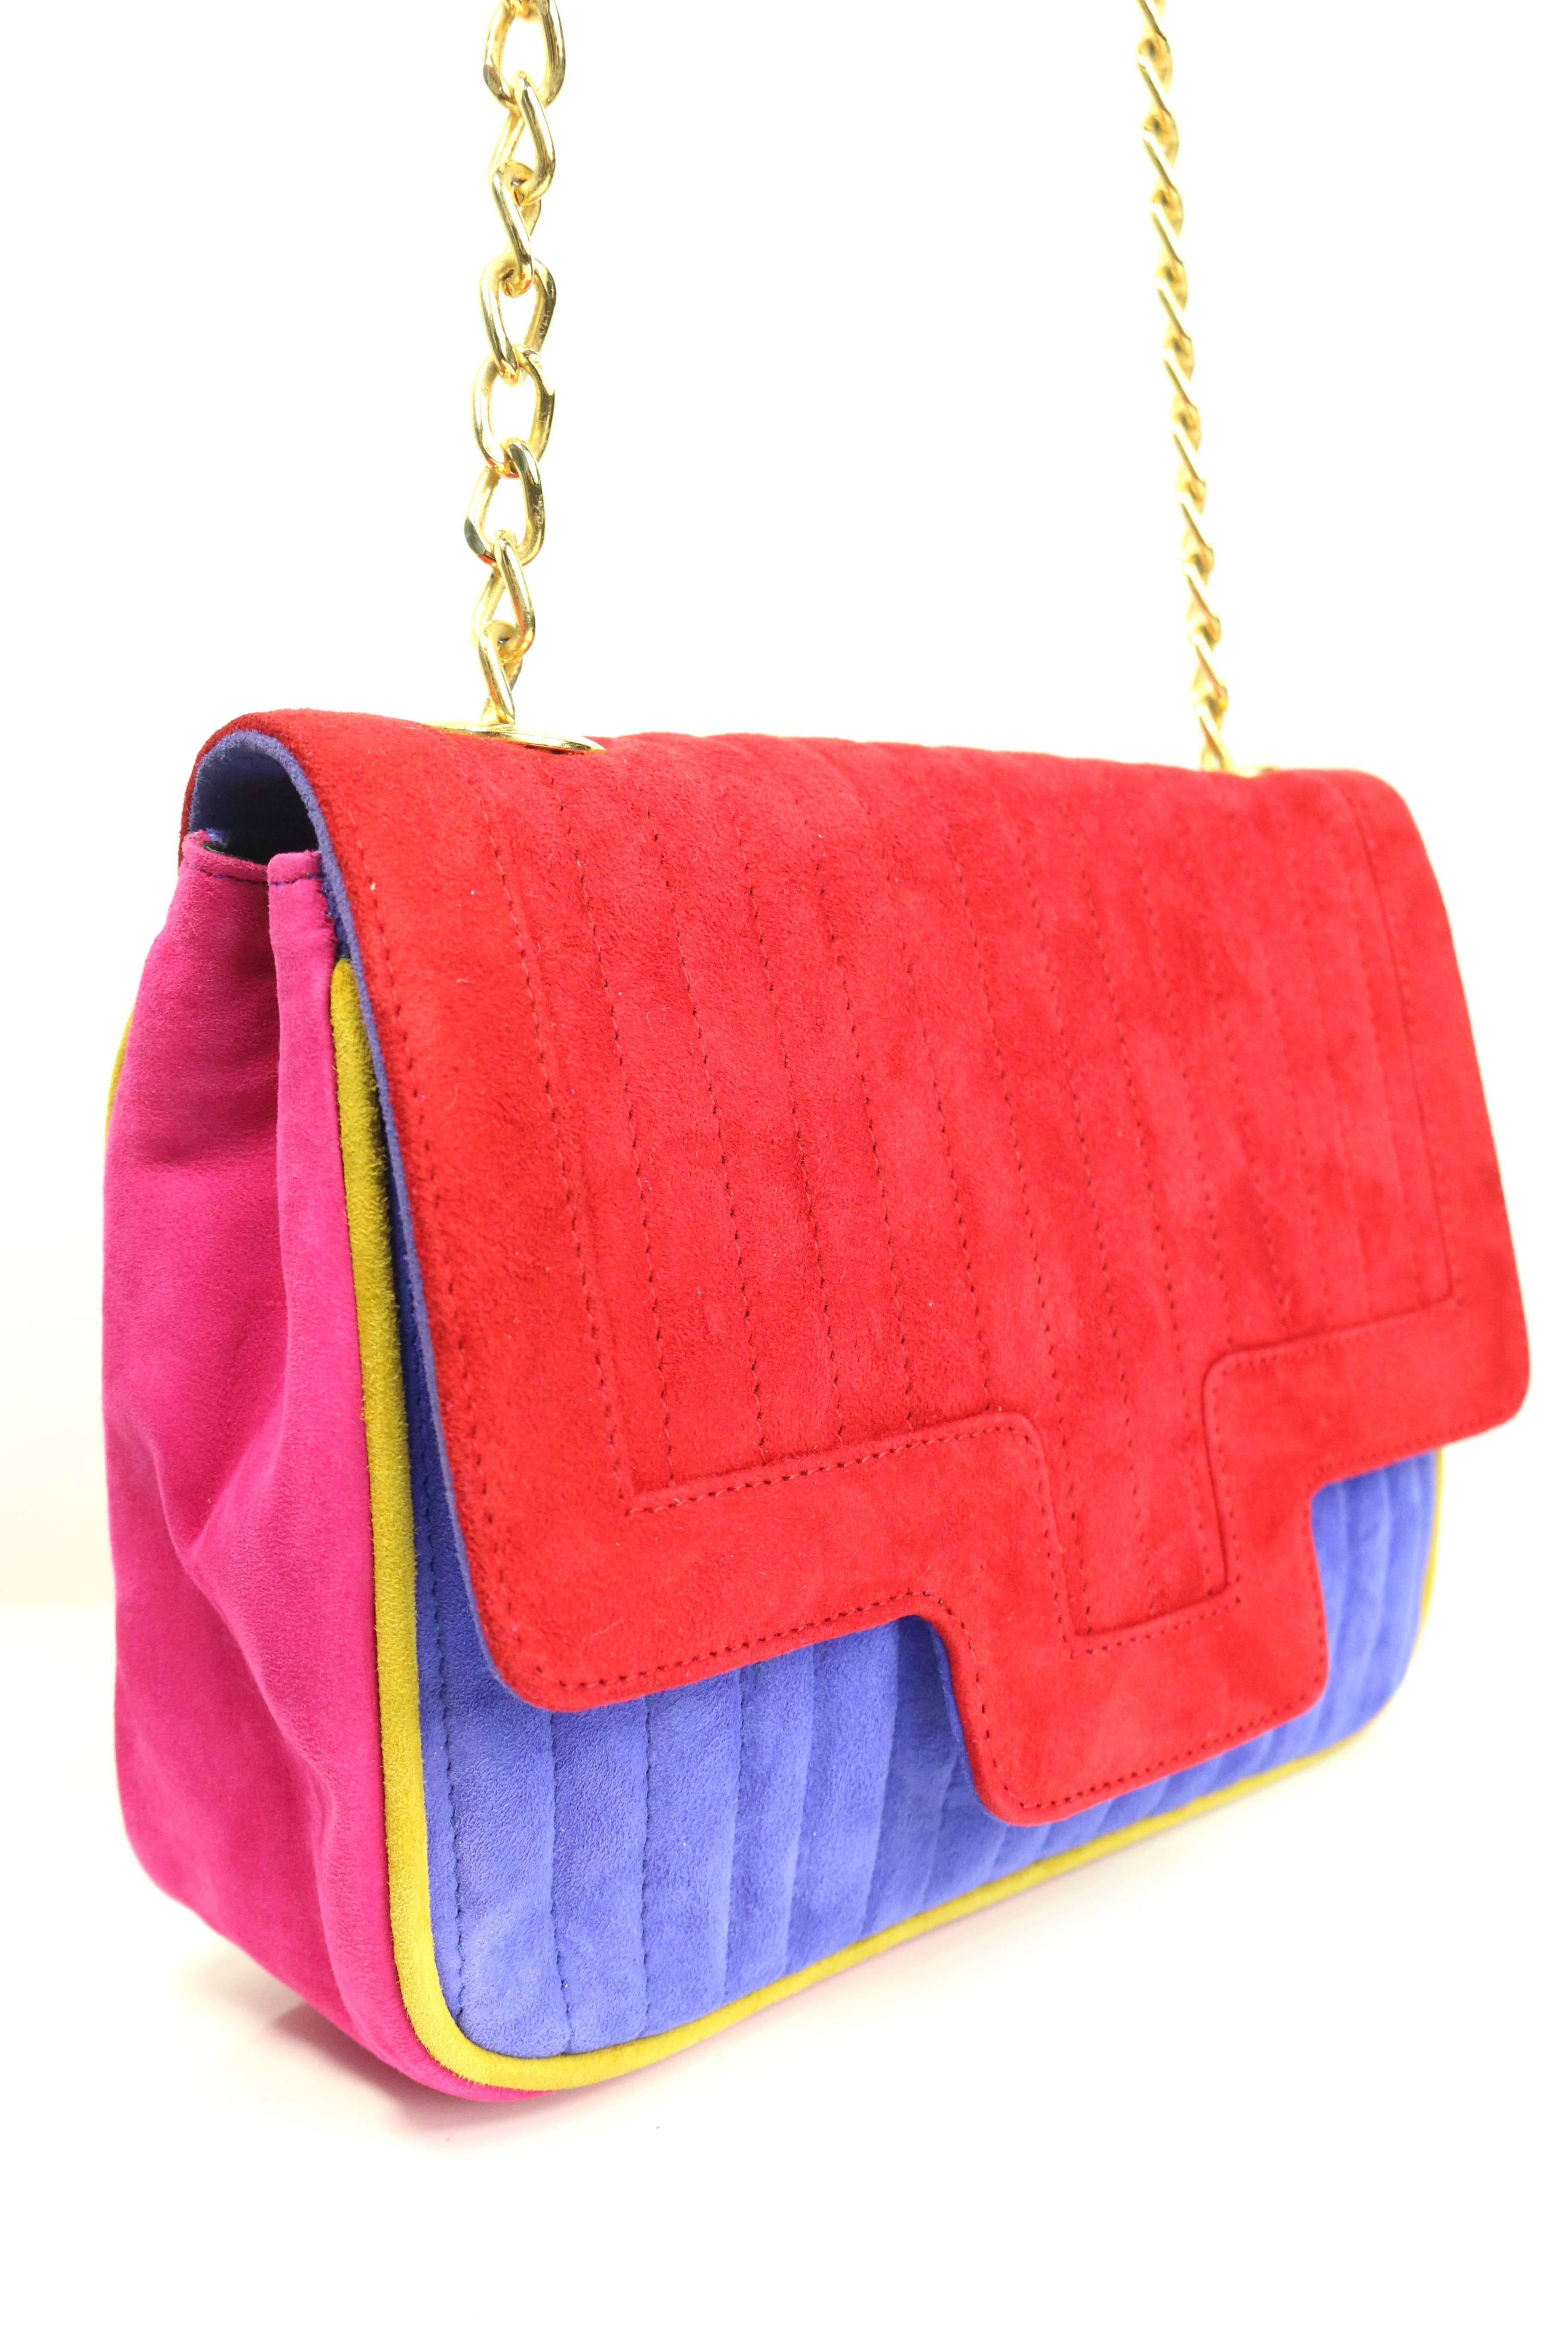 - Vintage 80s Pancaldi colour blocked (red, blue. pink and yellow trim) suede flap shoulder bag. 

- Featuring a gold toned chain attached with the black suede shoulder strap. 

- Flap with snap button closure. 

- Interior zip closure. 

- Length: